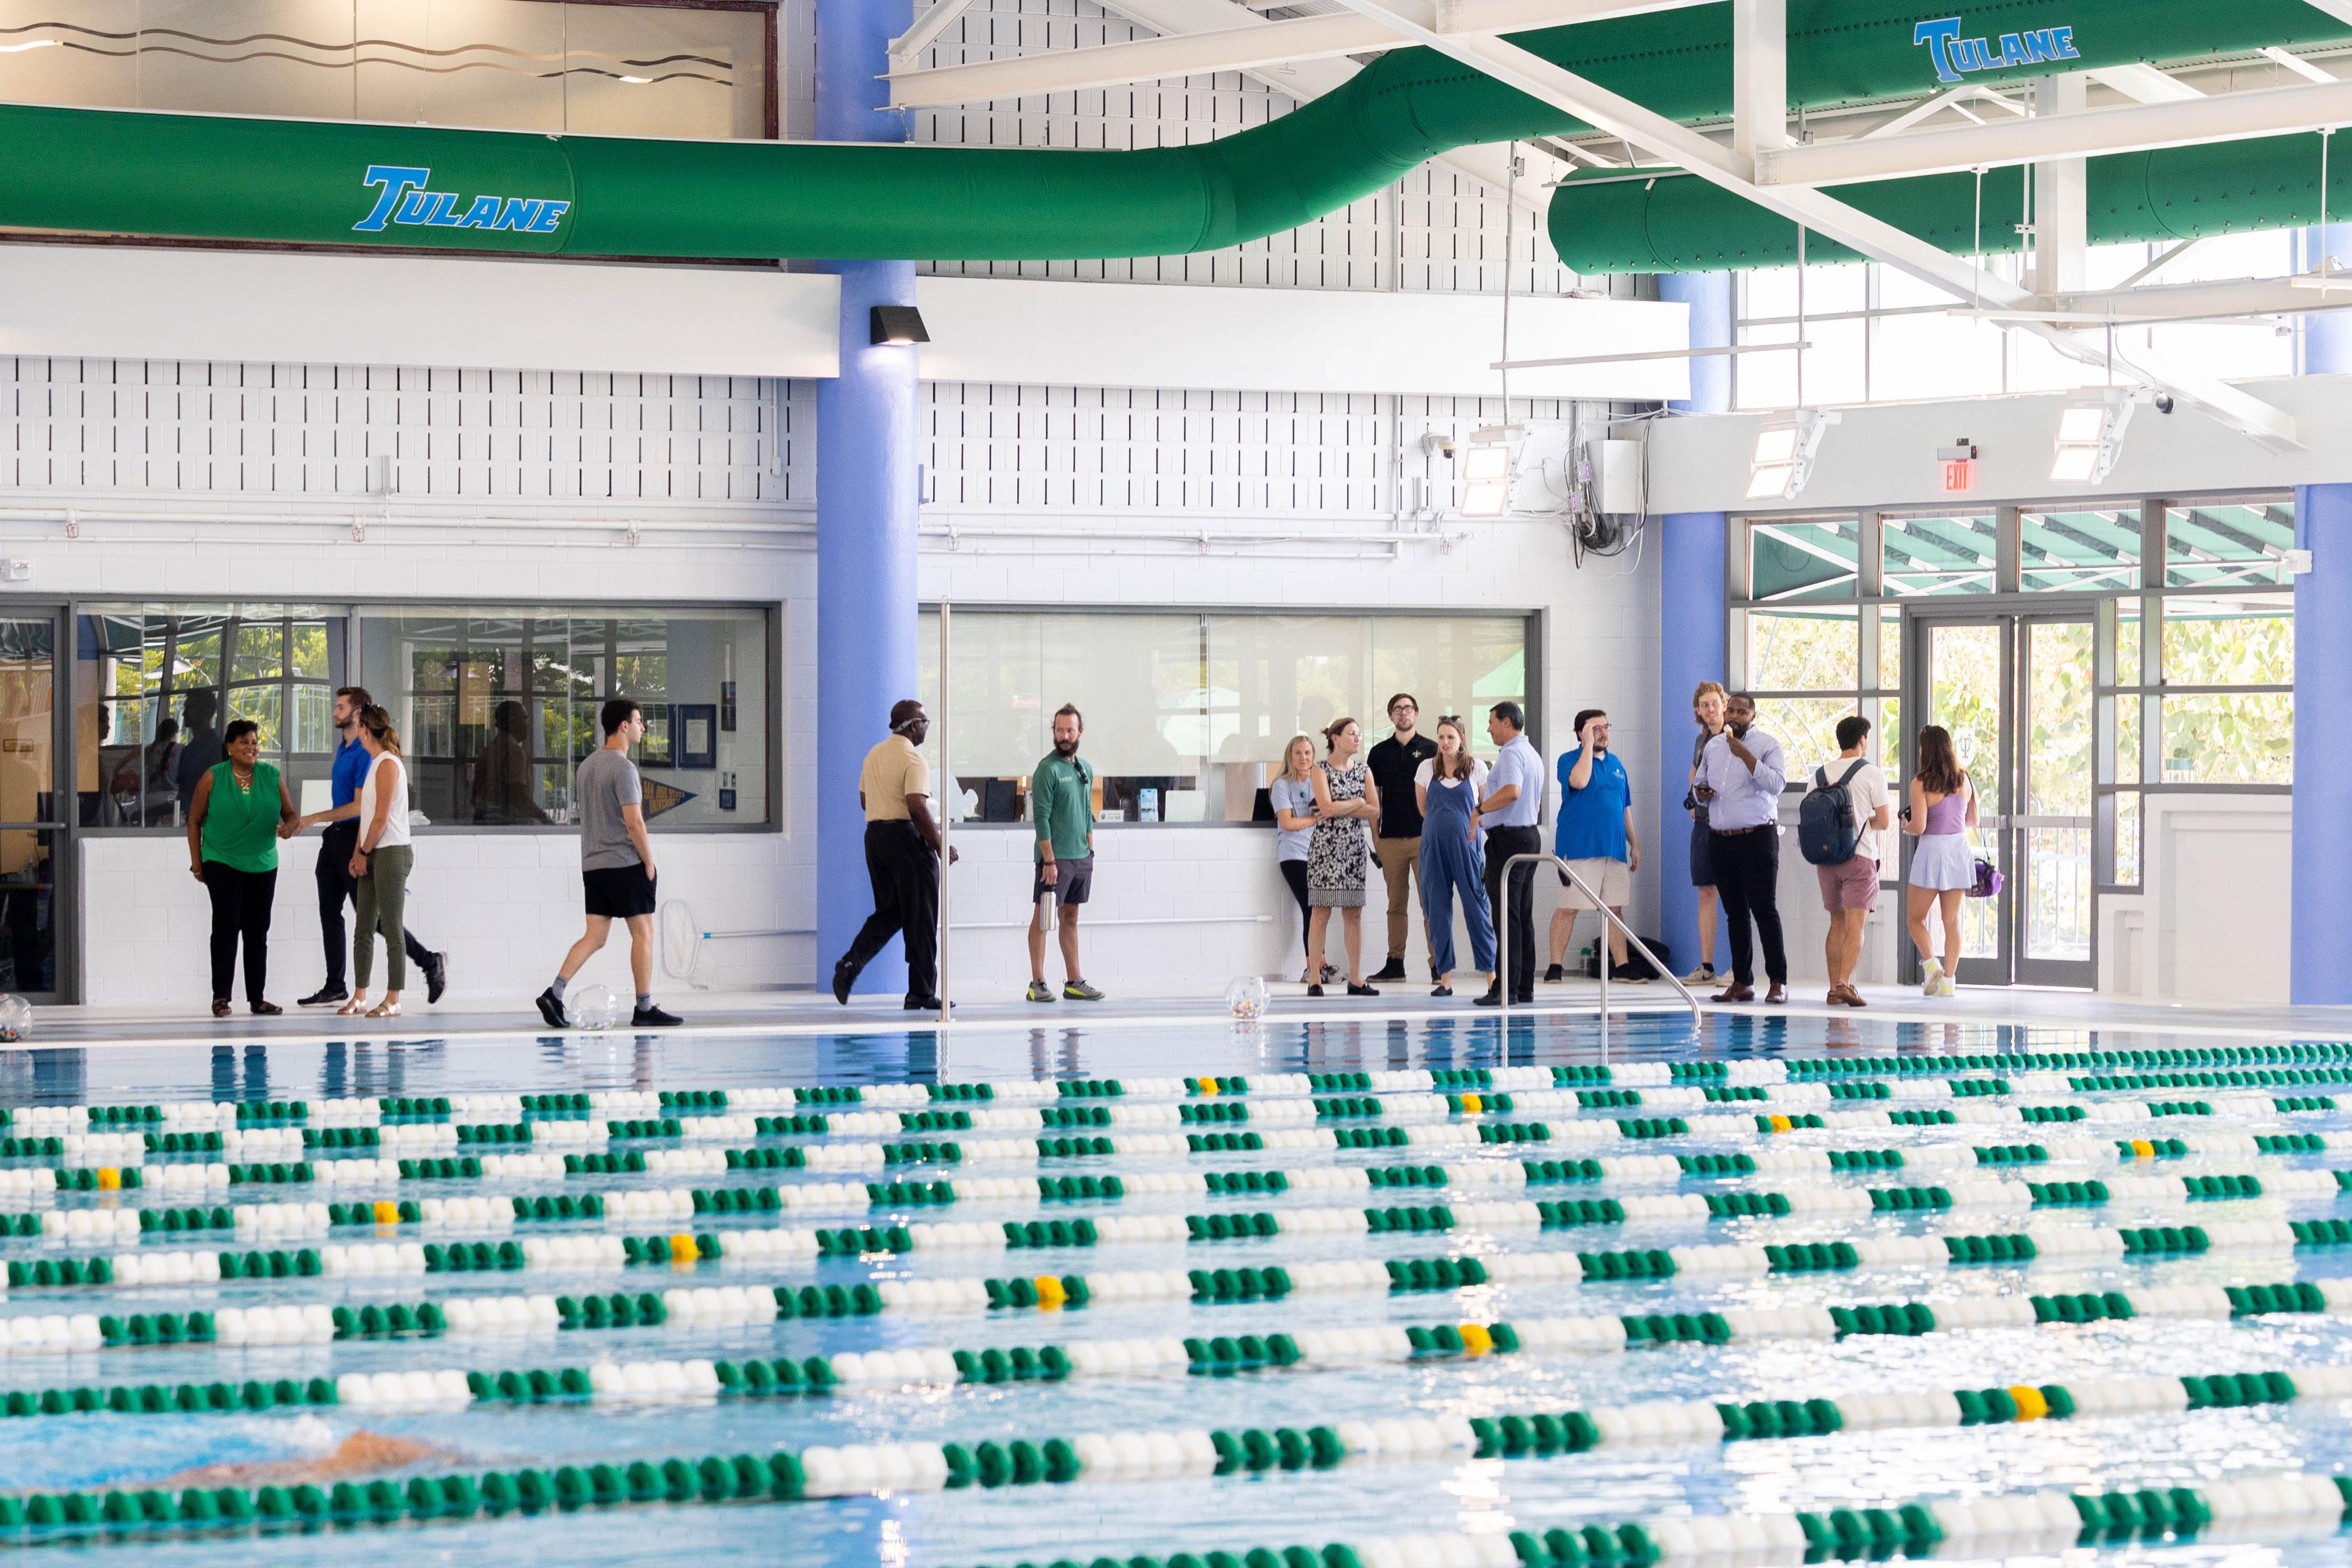 Tulane students, faculty and staff enjoy the natatorium opening at Tulane's Reily Student Recreation Center.